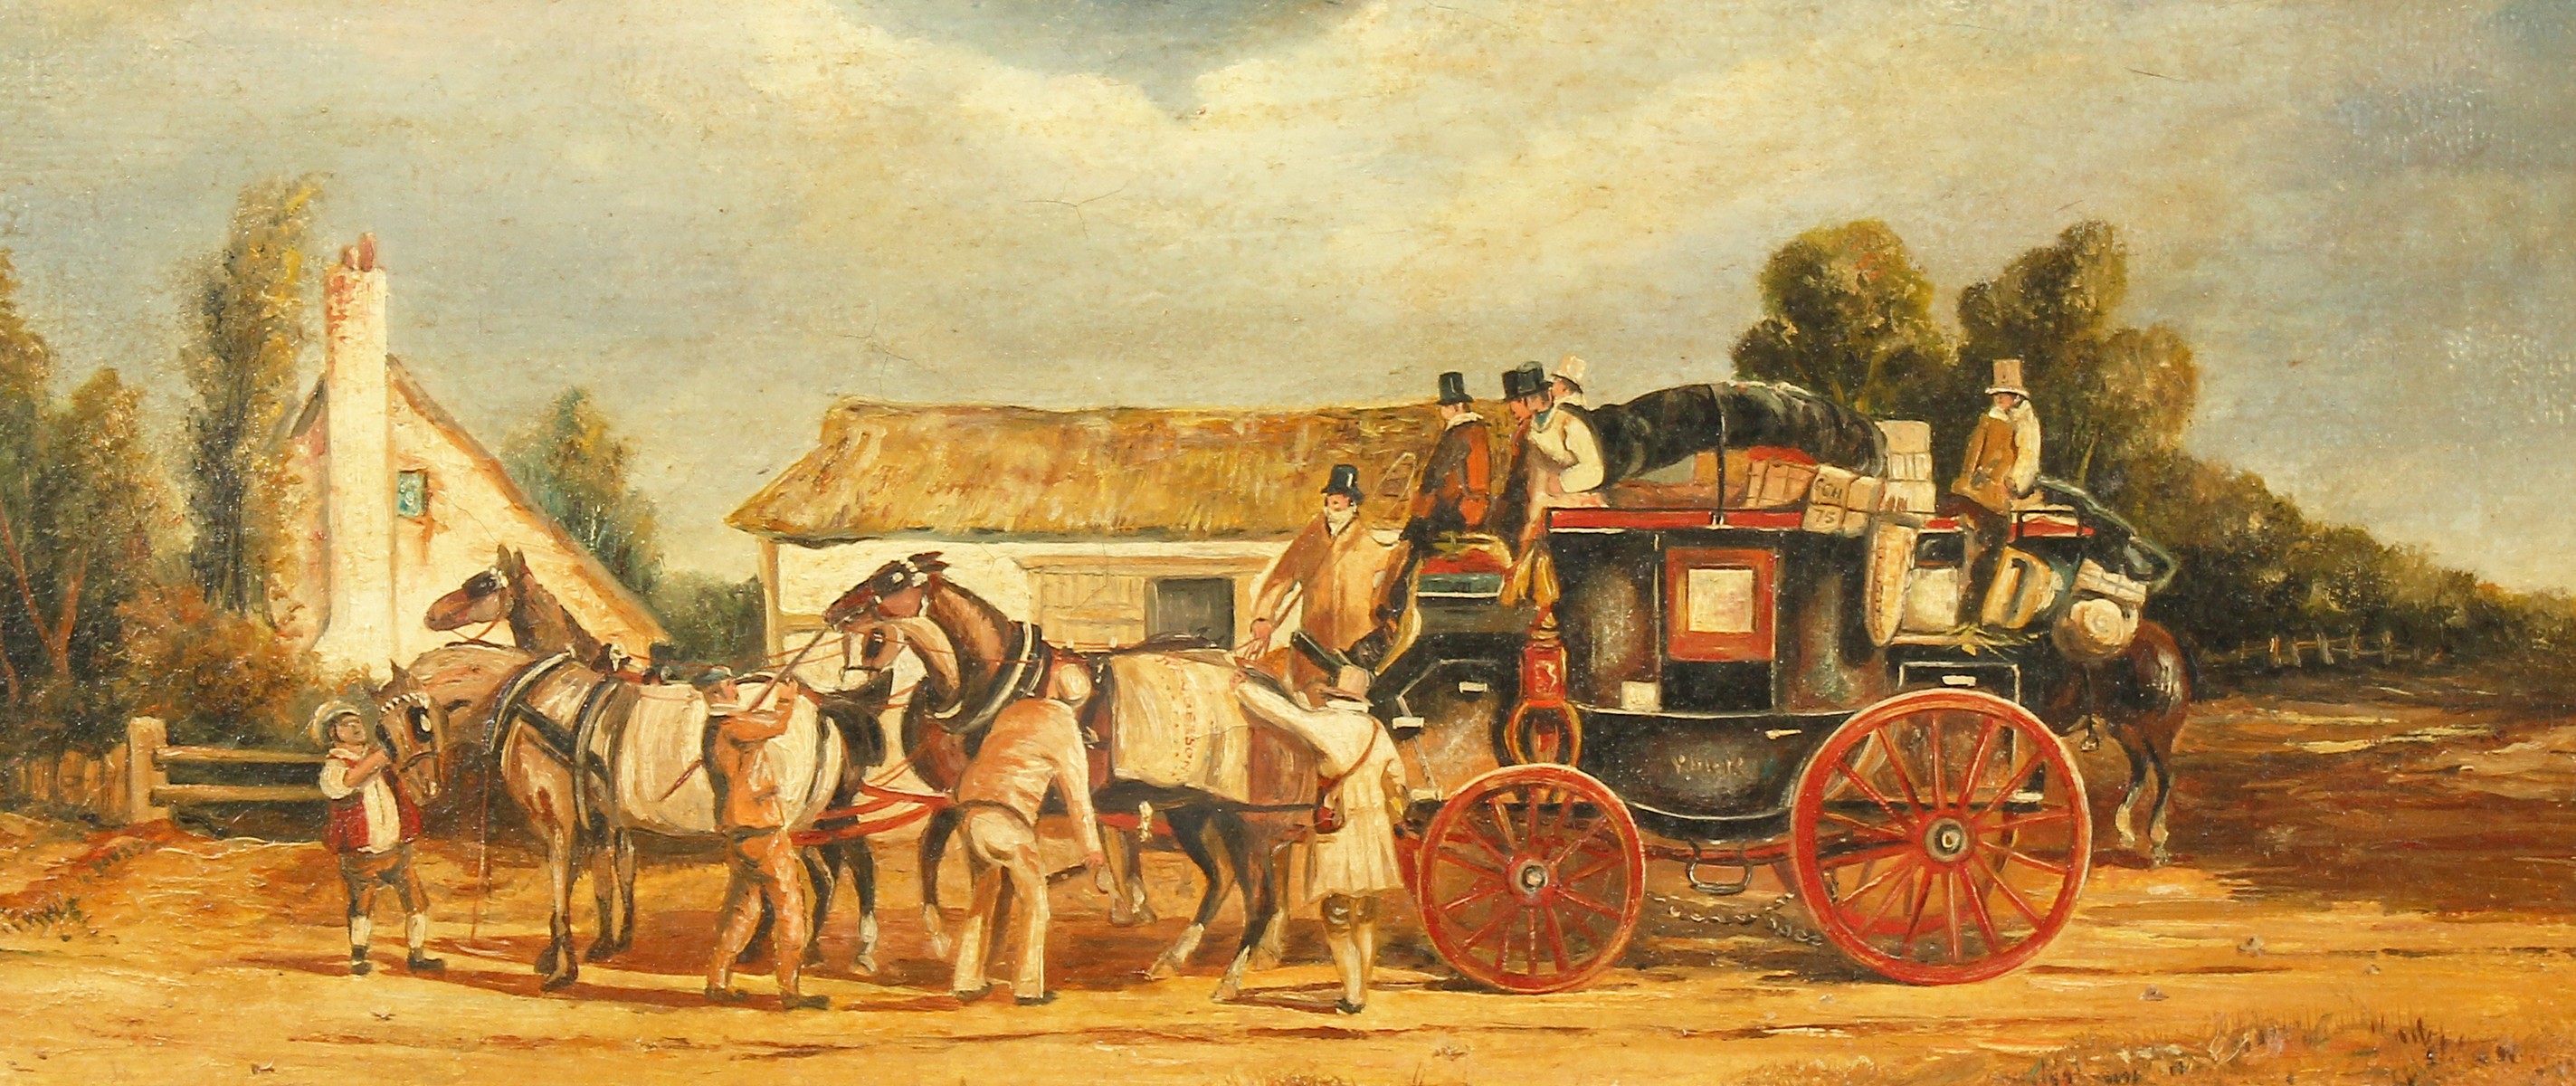 Charles Cooper Henderson (1803-1877), A coaching scene with Royal mail coaches, oil on canvas, 6"